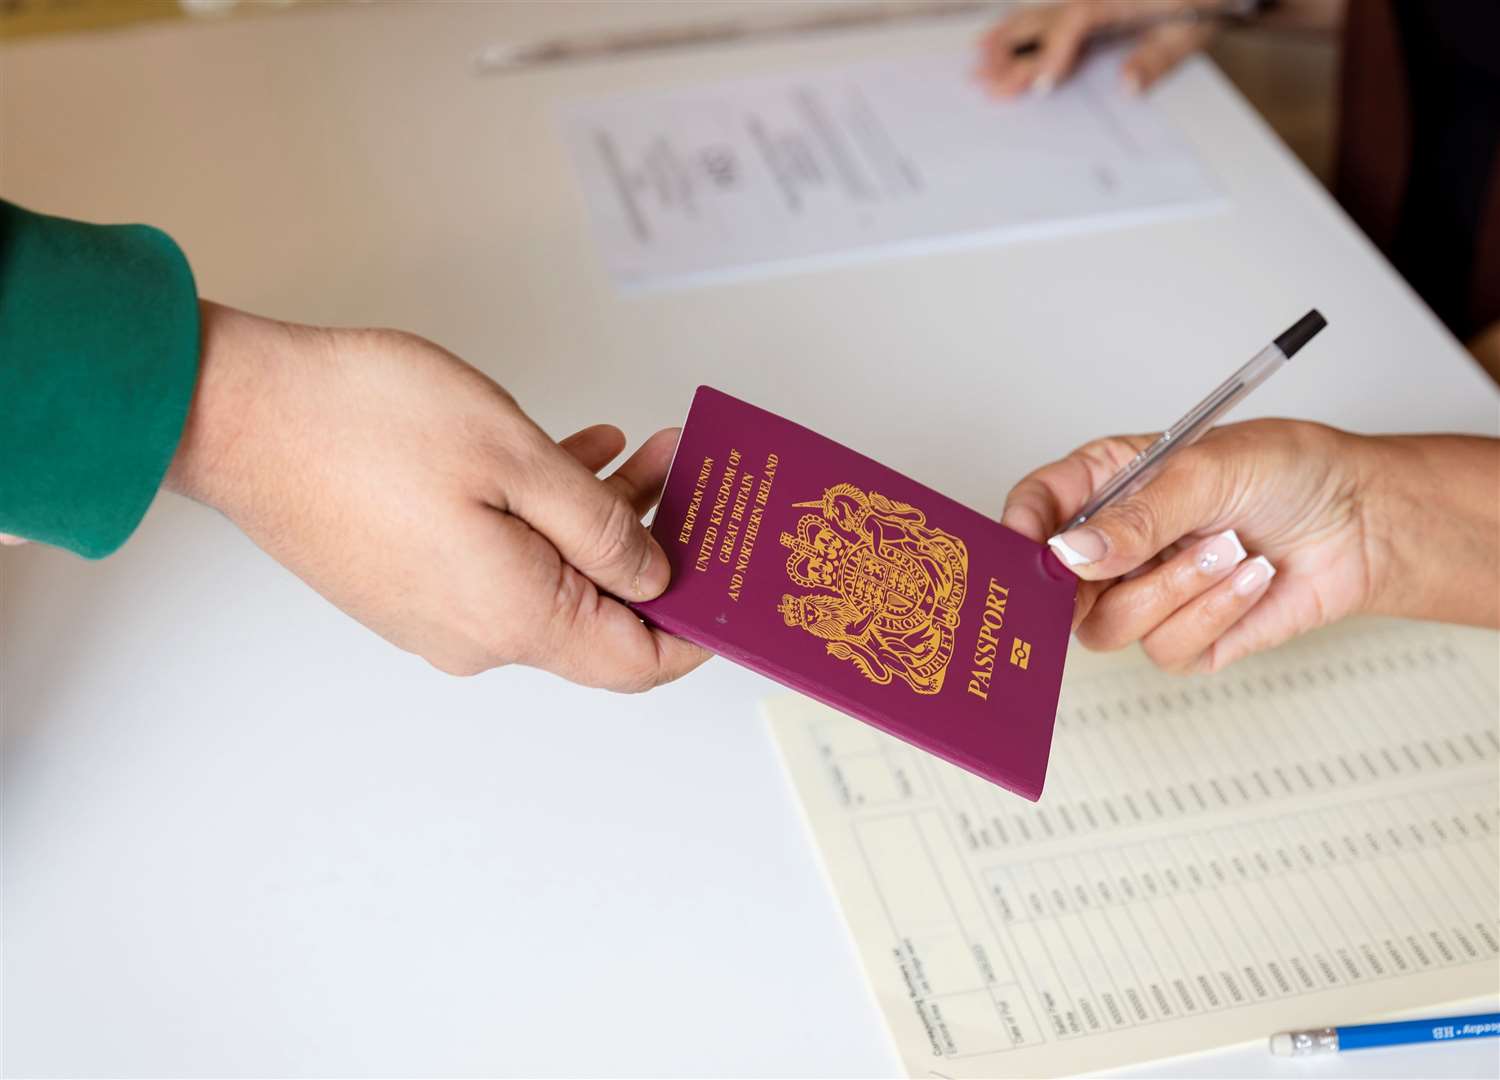 A passport is among the accepted forms of ID